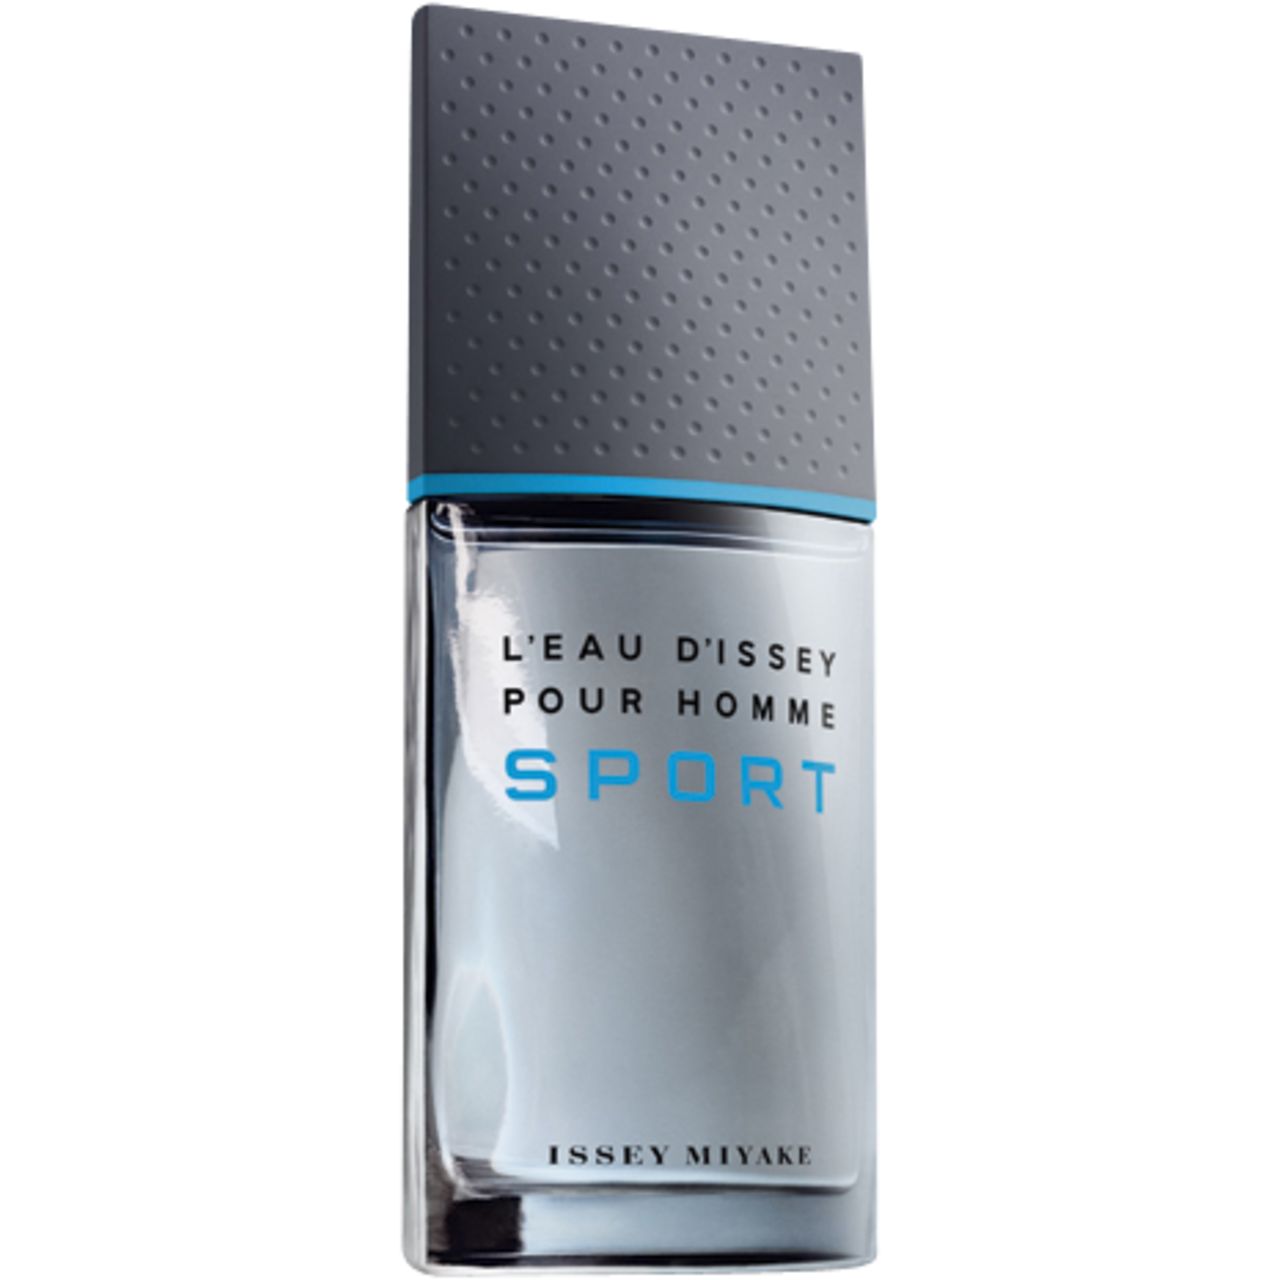 Issey Miyake, L'Eau d'Issey pour Homme Sport E.d.T. Nat. Spray